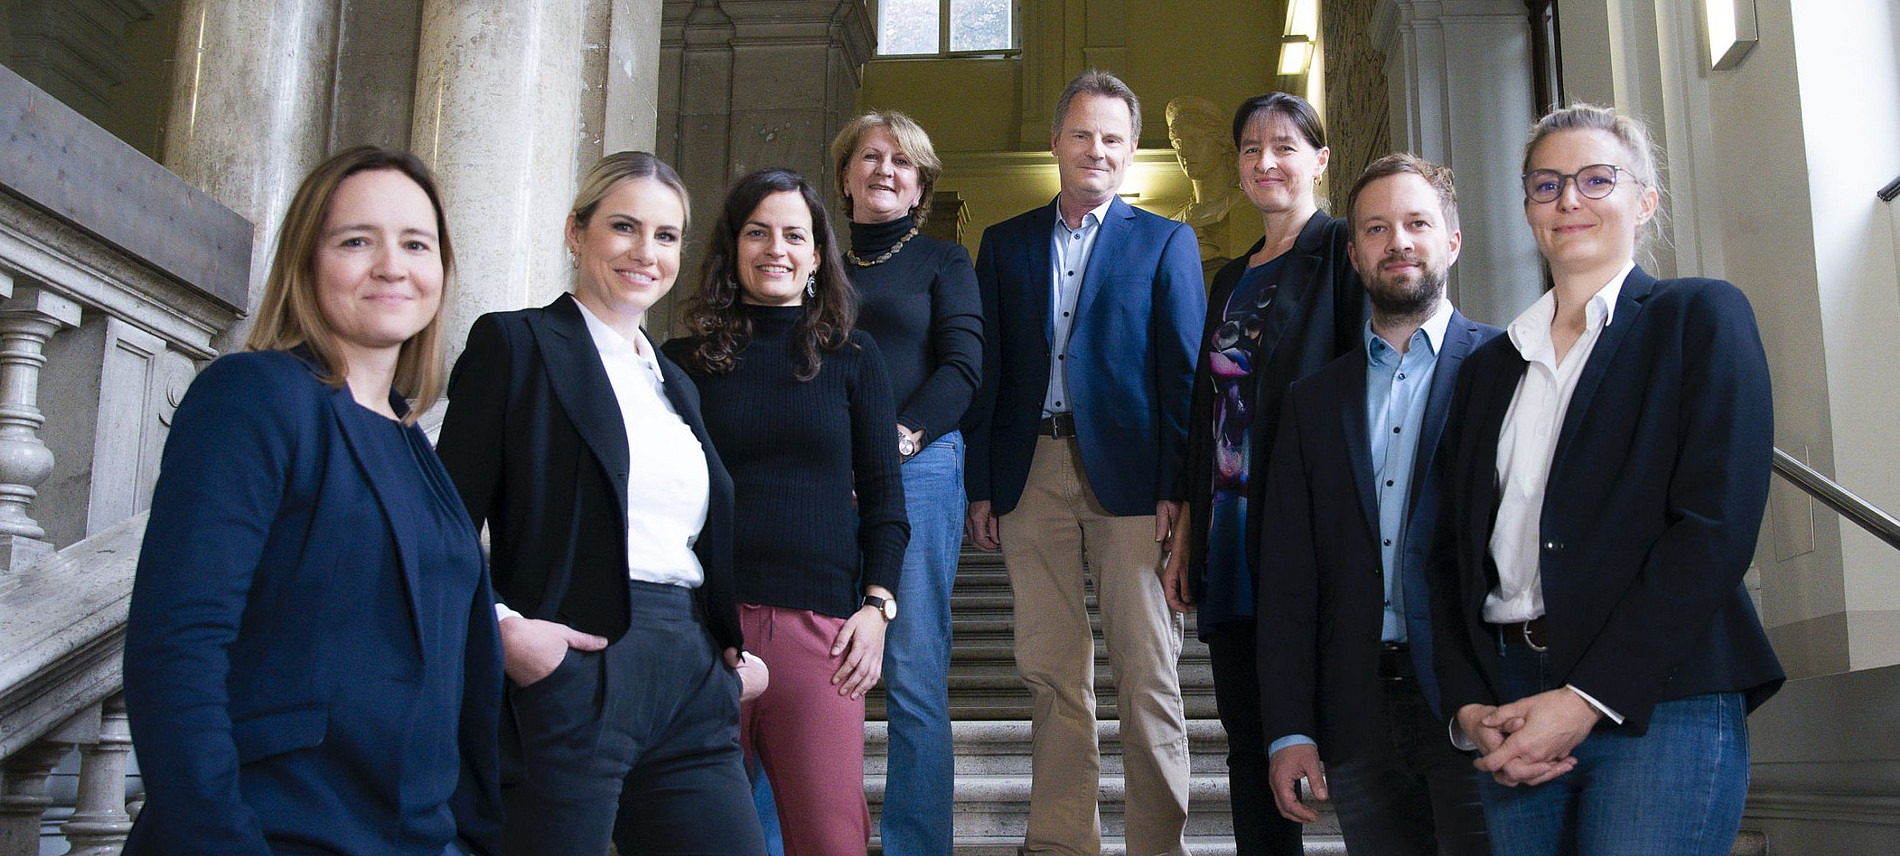 A group photo of the staff members of the Rector's office on the ceremonial staircase in the main building ©Uni Graz/Tzivanopoulos